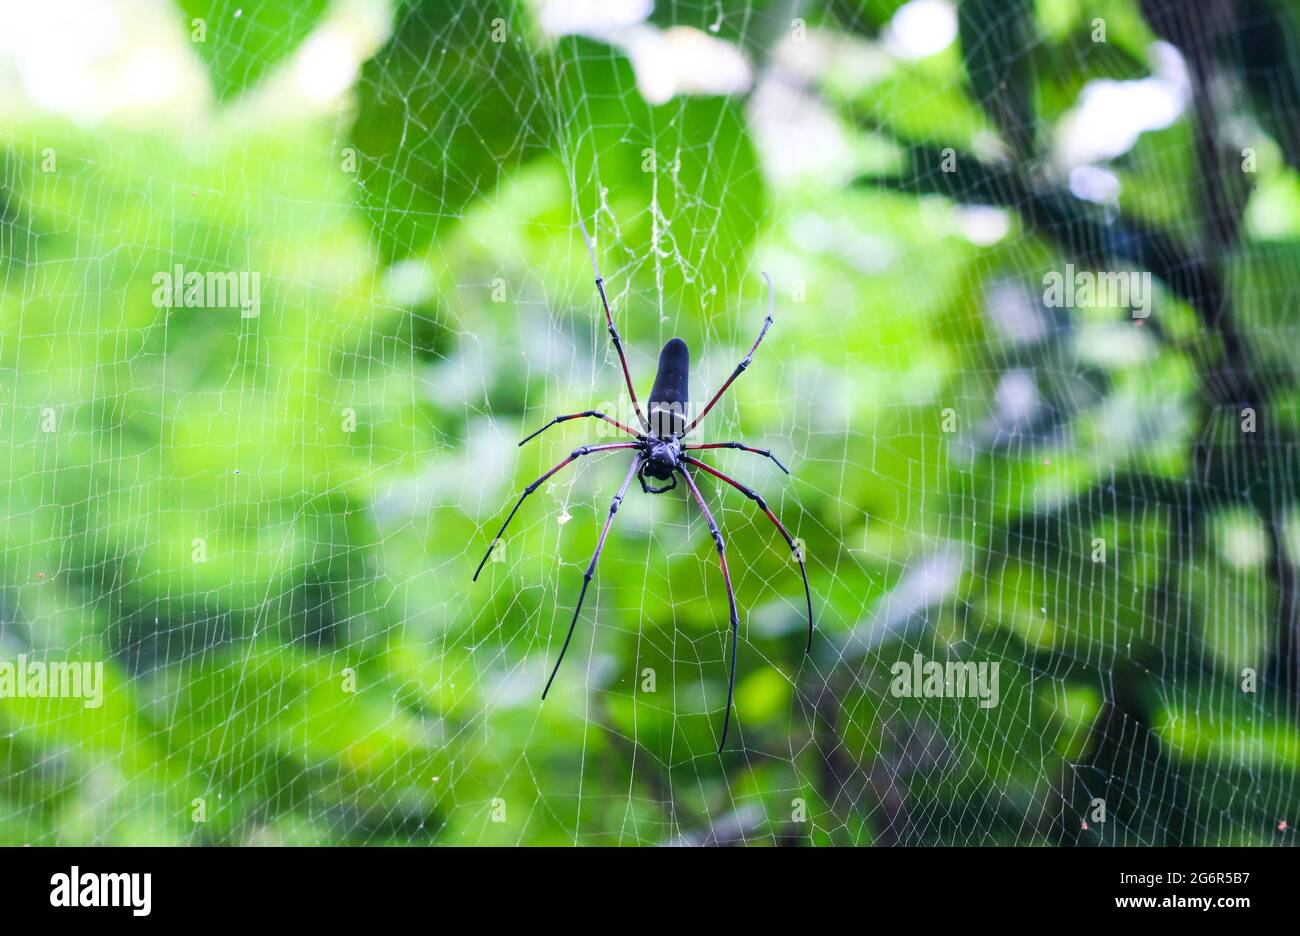 Spider sitting on web with green background for wallpaper. Spider hunting on cobweb. Stock Photo